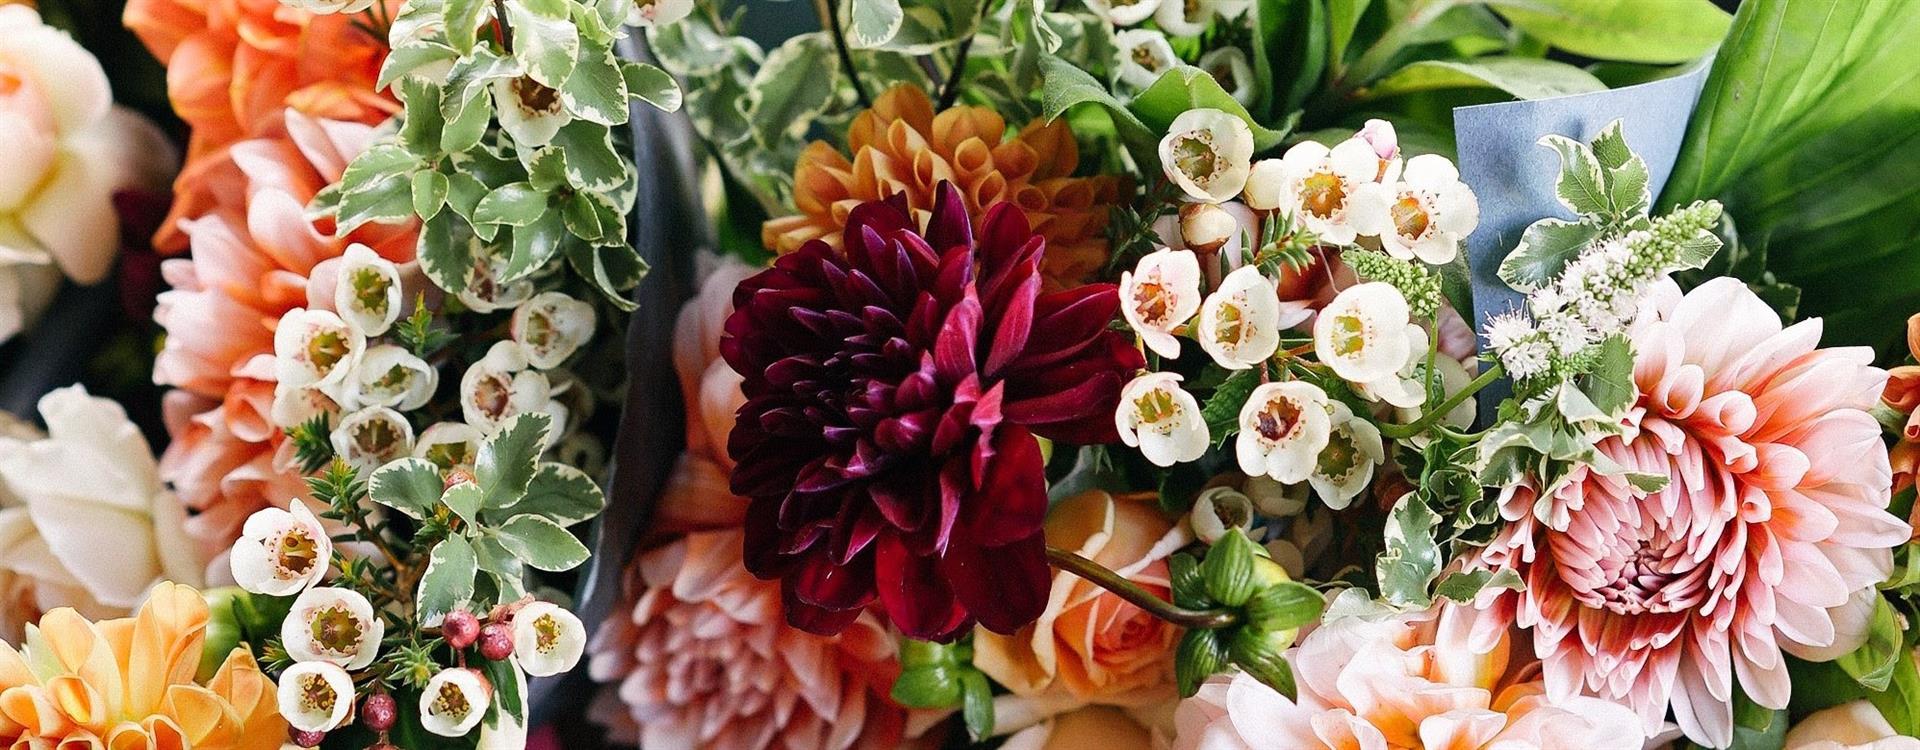 A bouquet of colorful flowers.